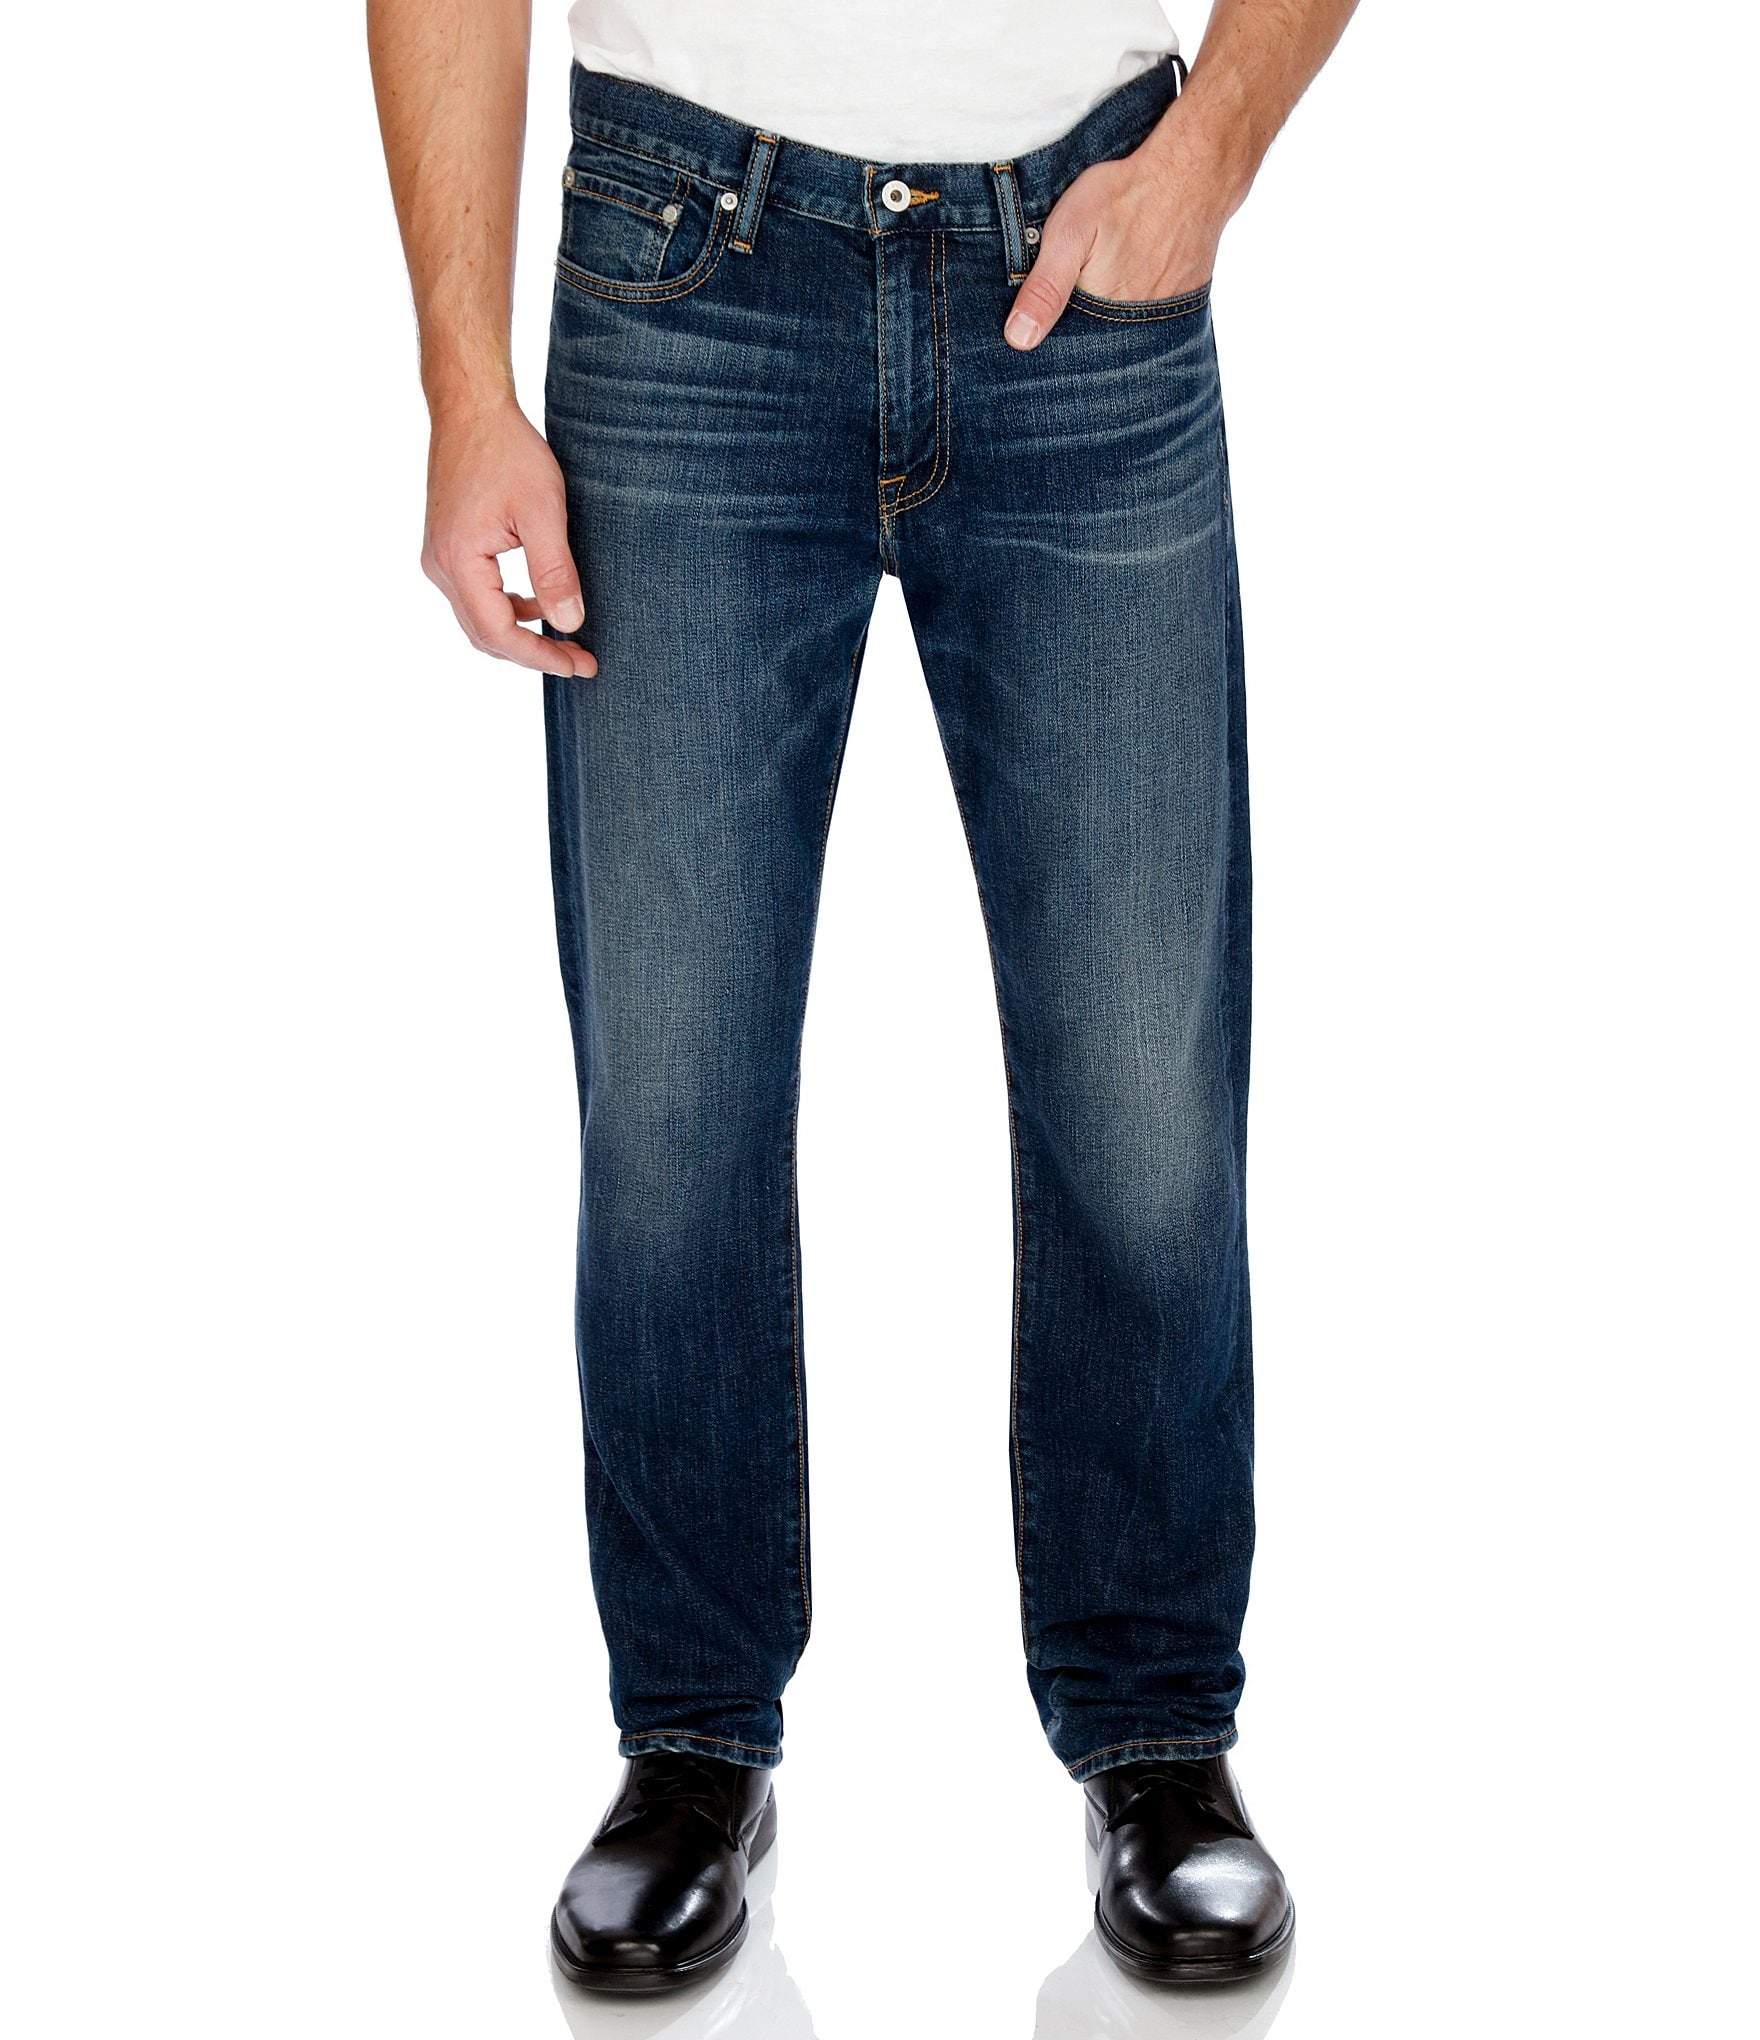 lucky jeans 410 athletic slim